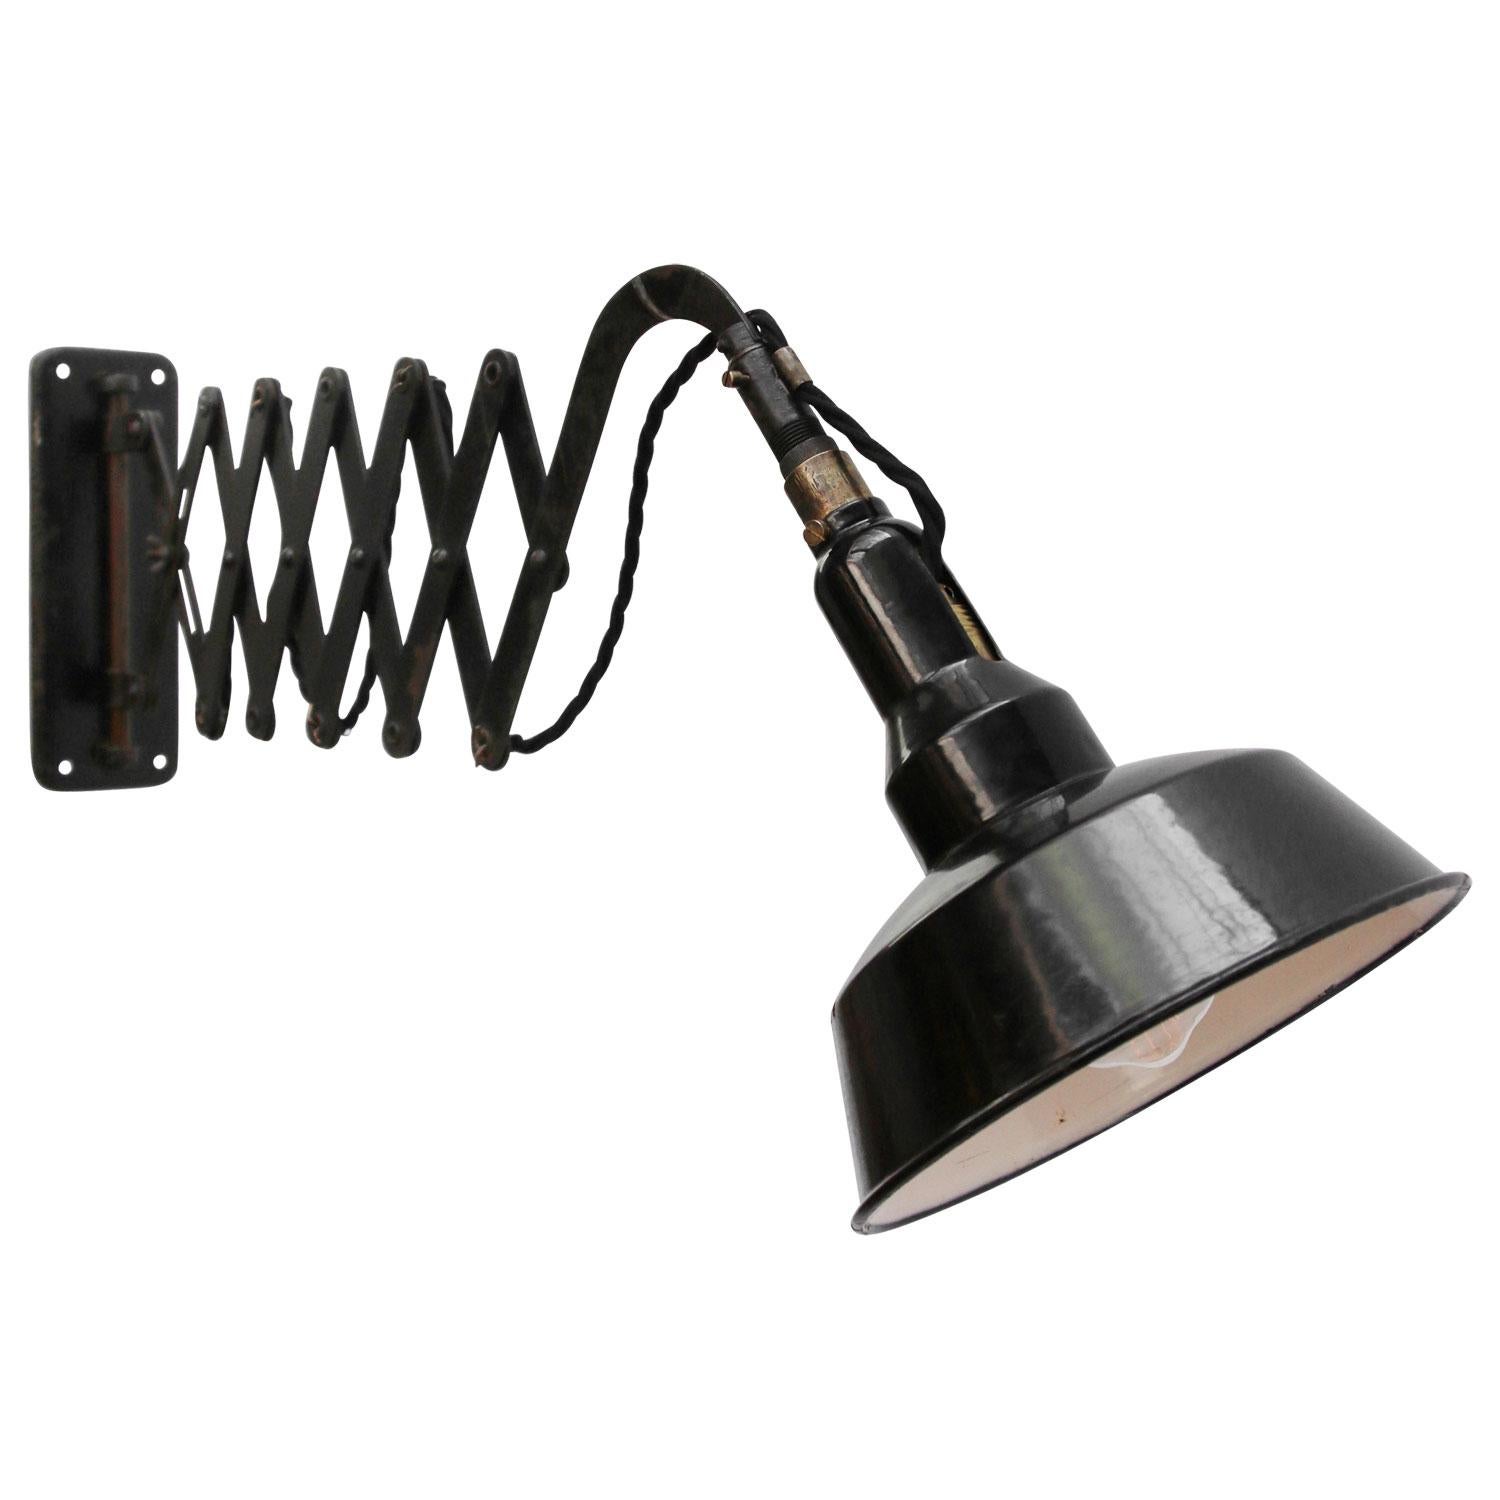 Metal and brass scissor wall light. Enamel shade diameter: 21 cm.
Maximum length: 100 cm. Minimum length: 50 cm. Wall plate: 23 × 8 cm.

Weight: 2.5 kg / 5.5 lb

Priced per individual item. All lamps have been made suitable by international